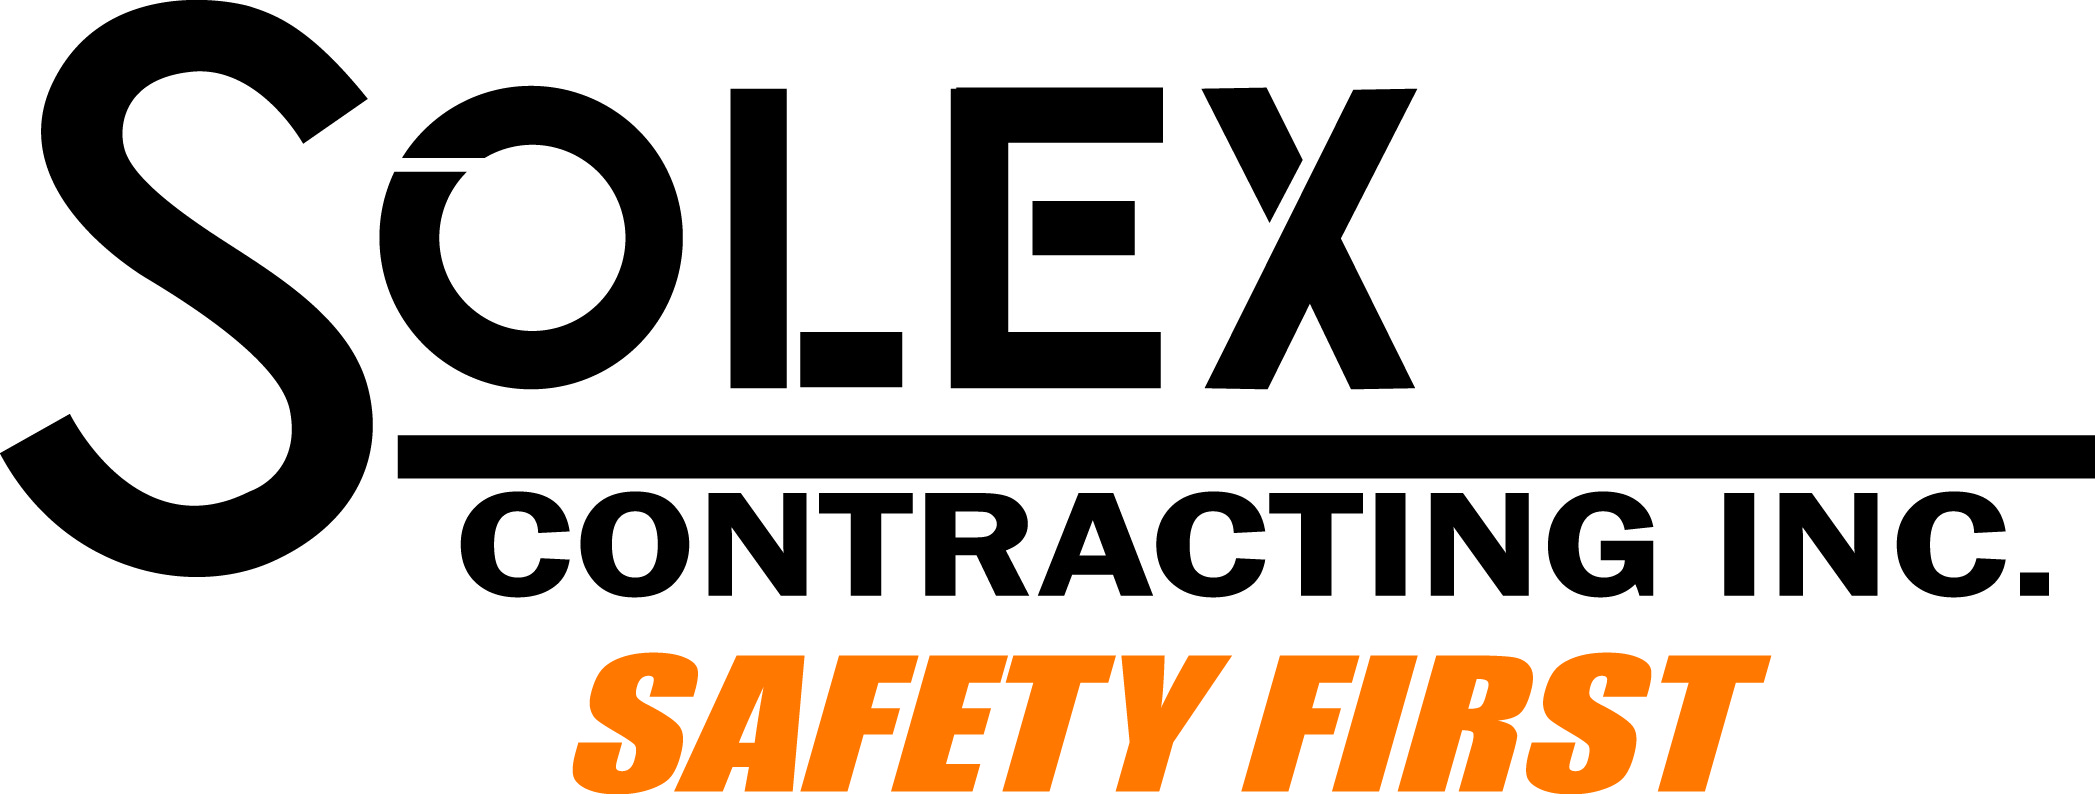 Solex Contracting Inc. Telecom Site Safety Audit Form - duplicate